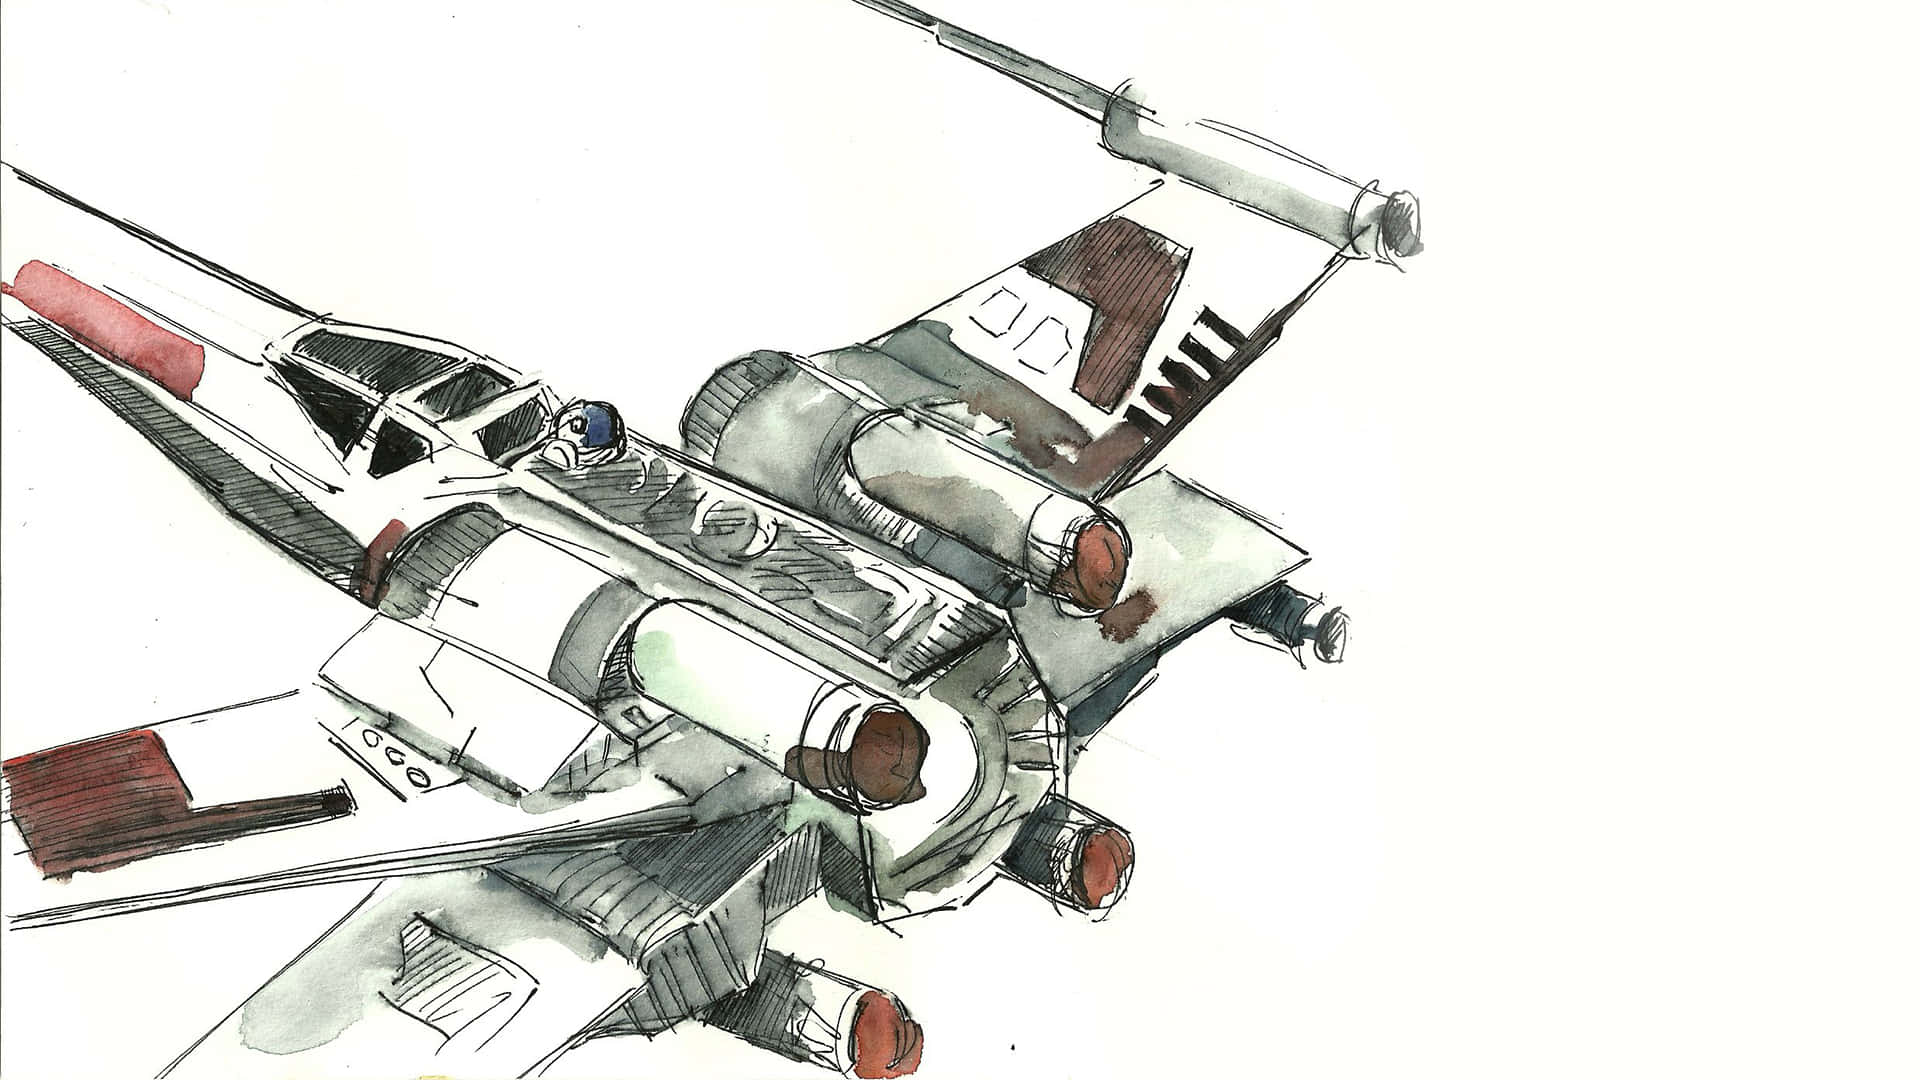 The iconic Z-95 Headhunter fighter jet Wallpaper